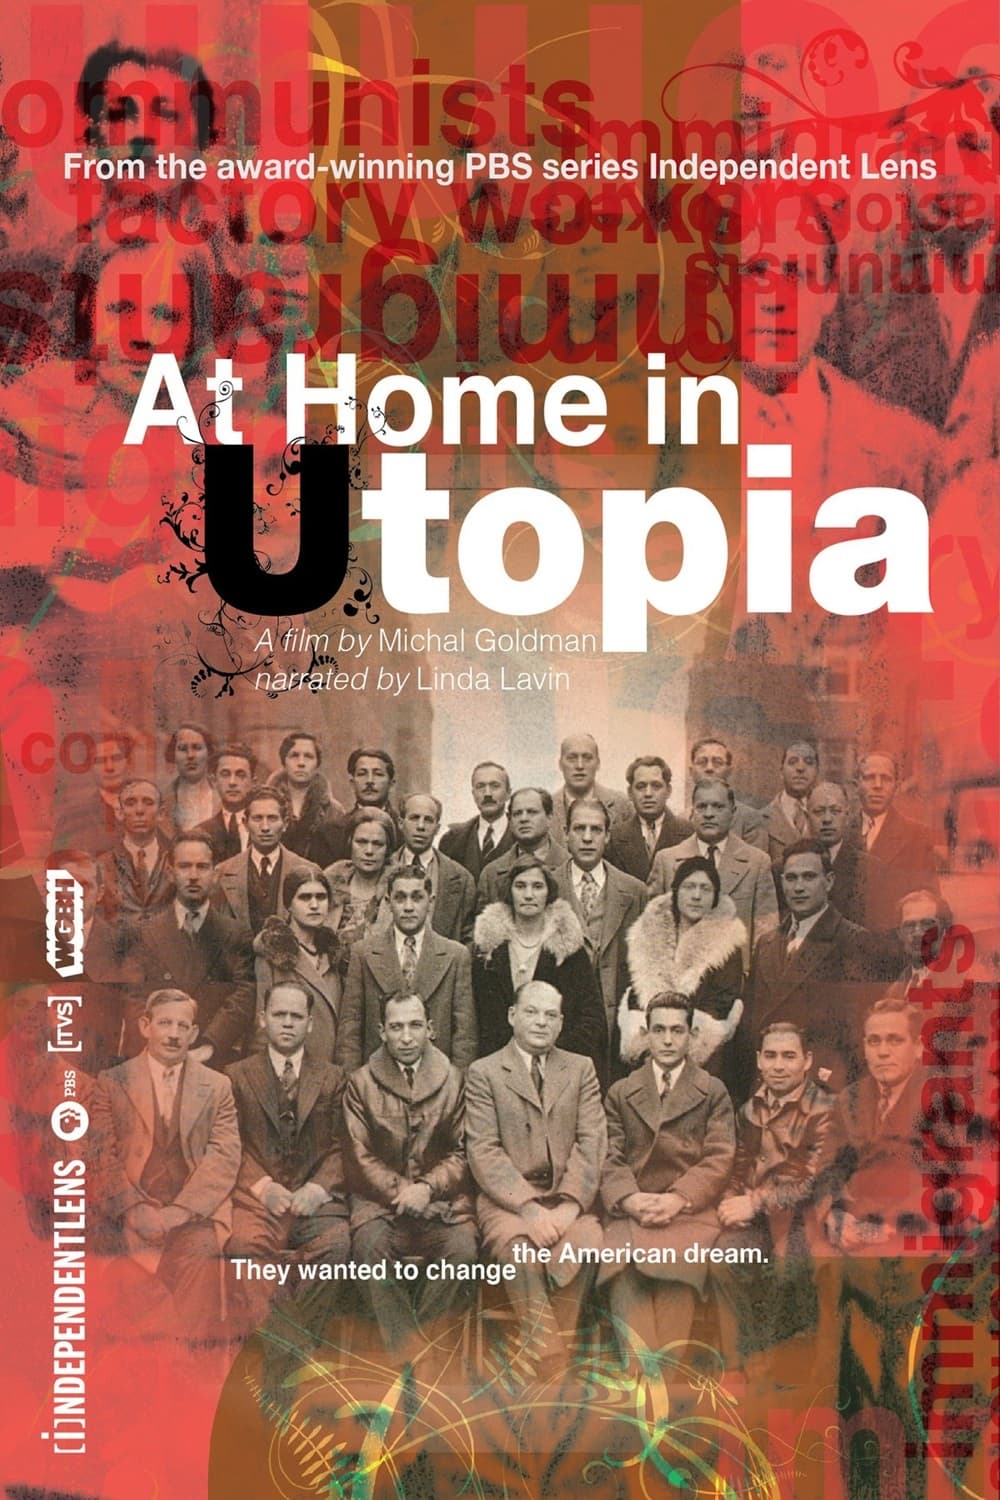 At Home in Utopia